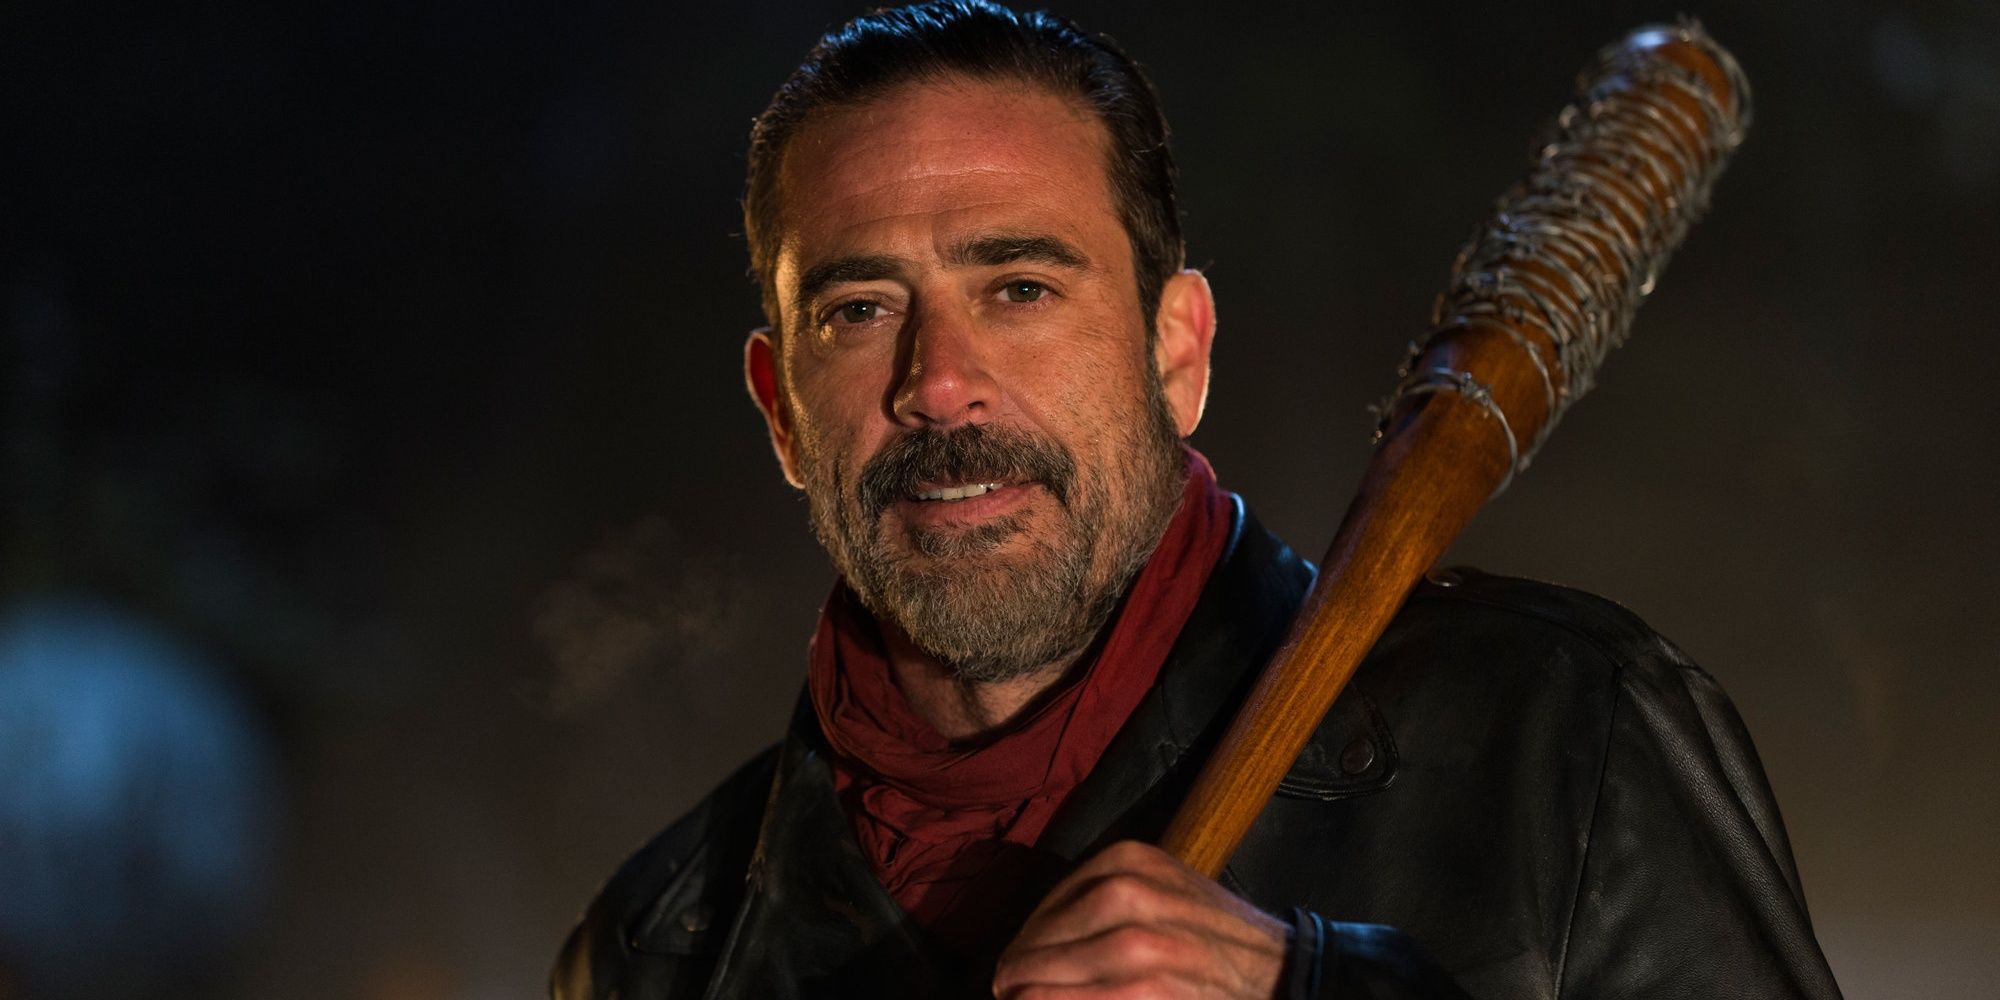 Negan smiling with a baseball bat in The Walking Dead